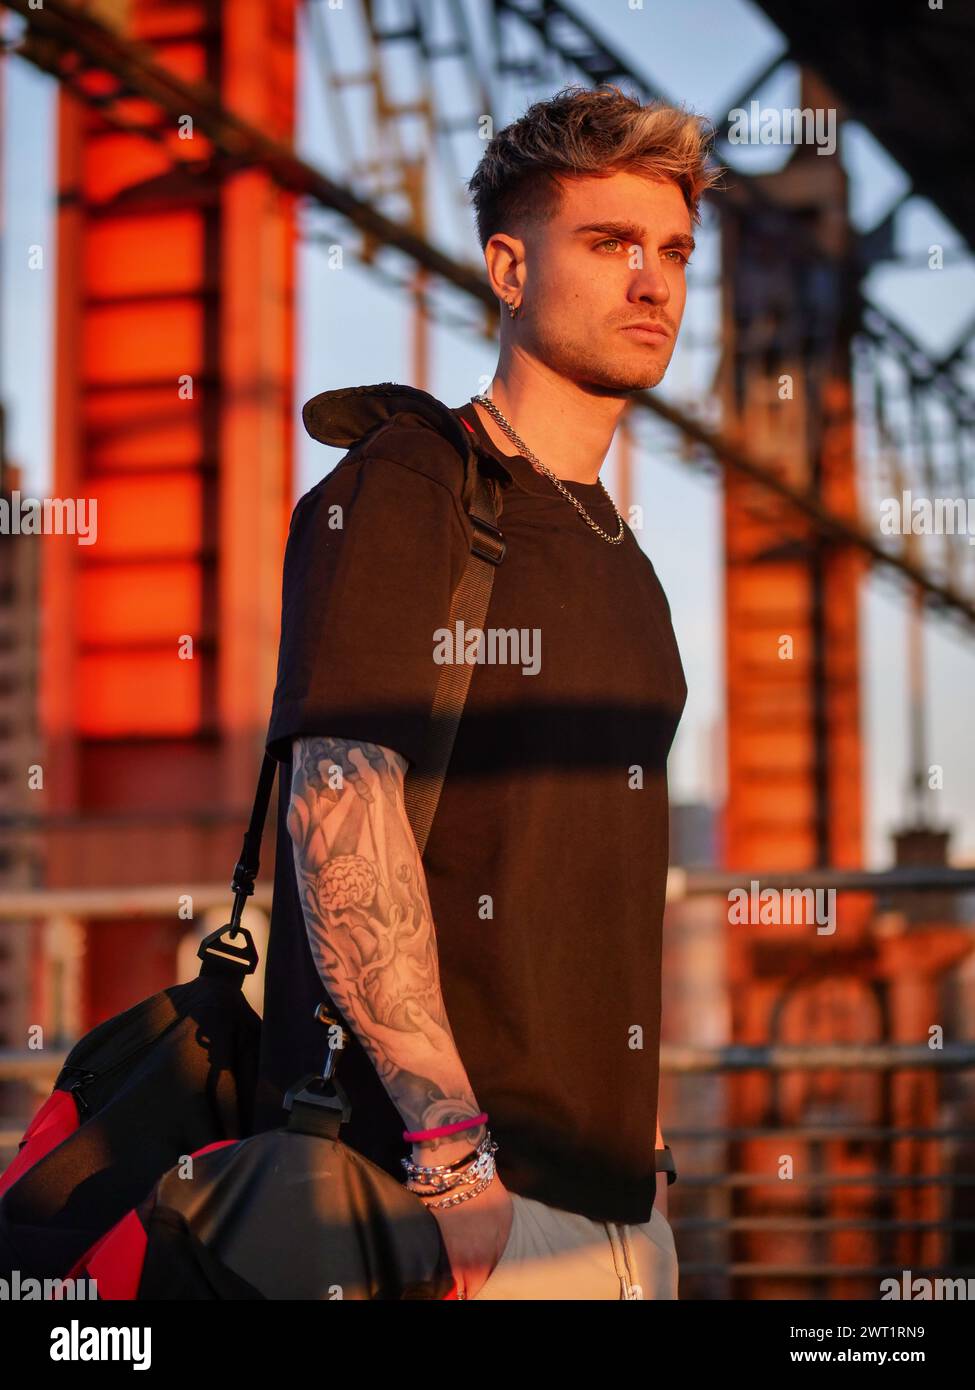 A man with a visible tattoo on his arm stands confidently in front of a modern building. He gazes ahead, creating a striking contrast between his edgy Stock Photo